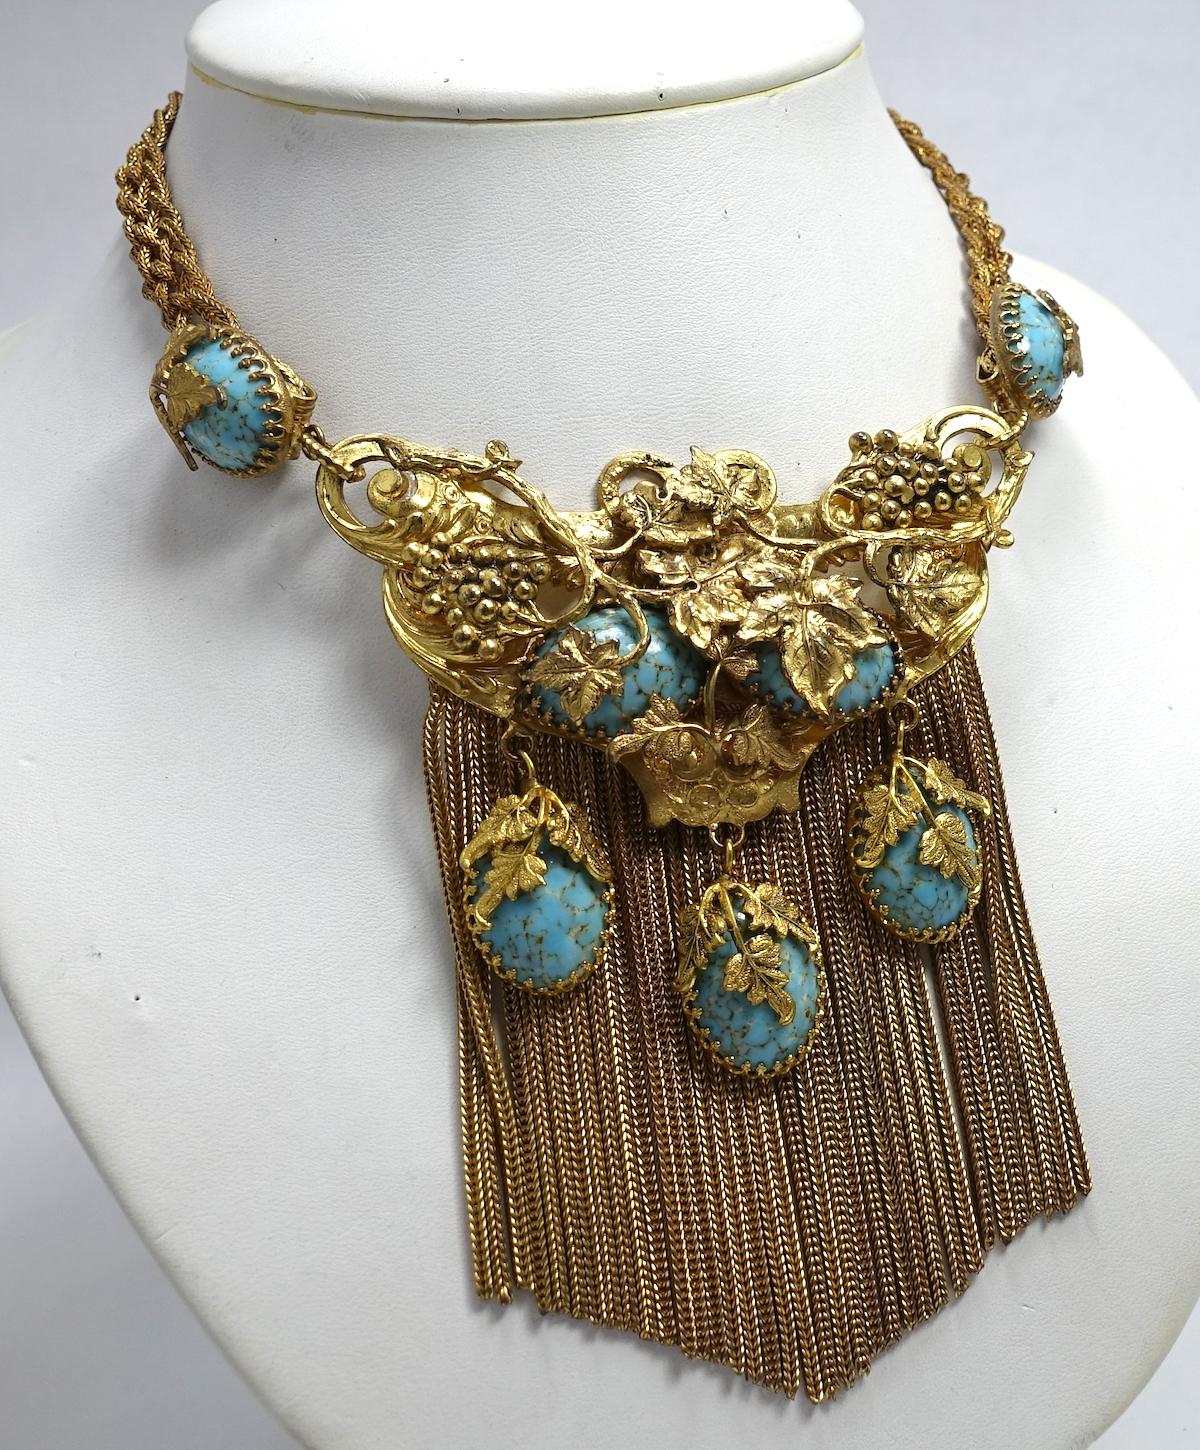 This Victorian vintage necklace is 3-dimensional featuring faux turquoise stones set in filigree designs. It has dangling chains at the bottom in a gold tone setting.  The necklace measures 15” long with a hook closure. The front drop is 4-1/4” long